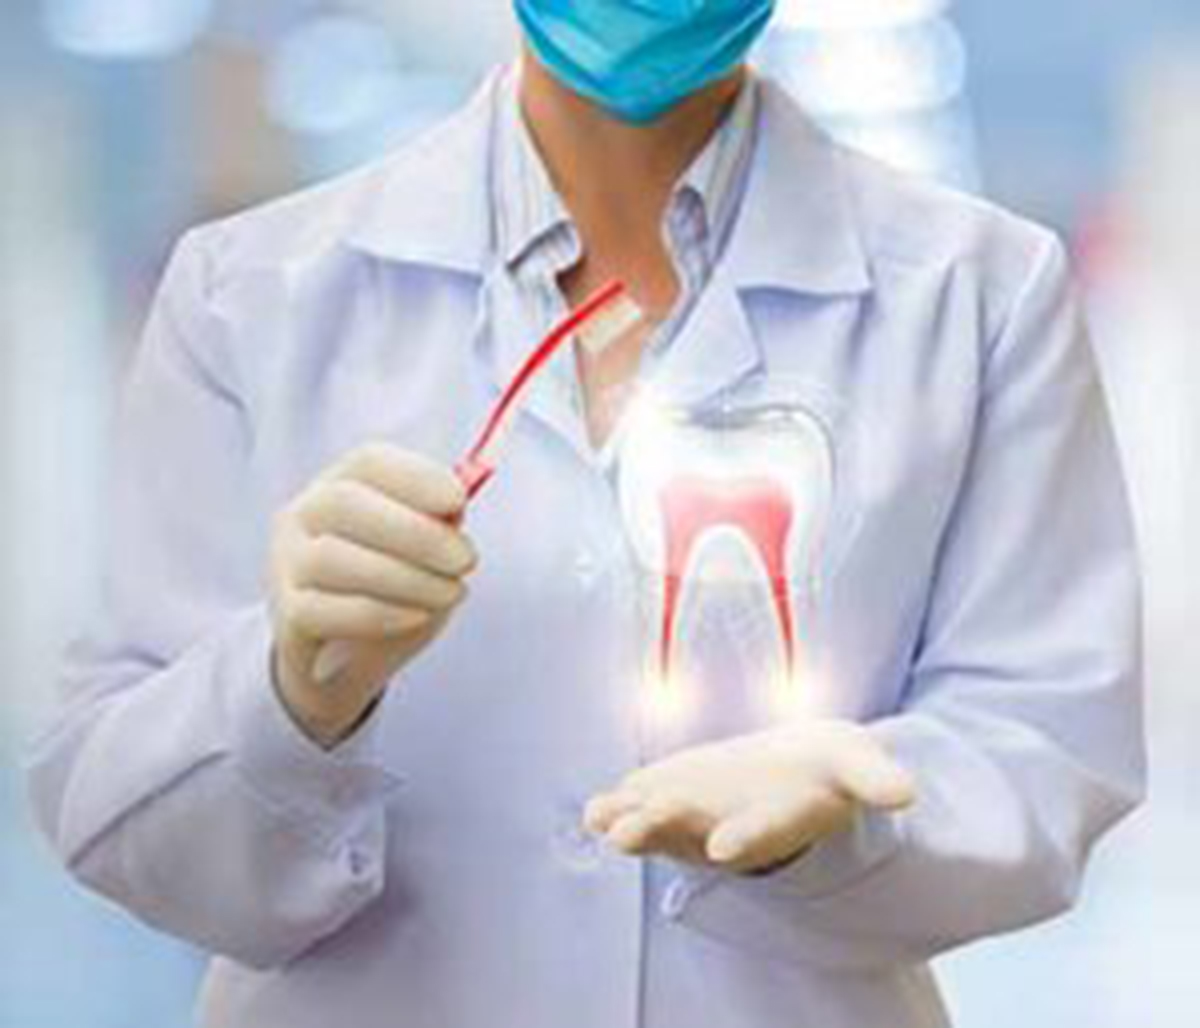 Maine dentist discusses how biologic dental care helps with healthy teeth and gums